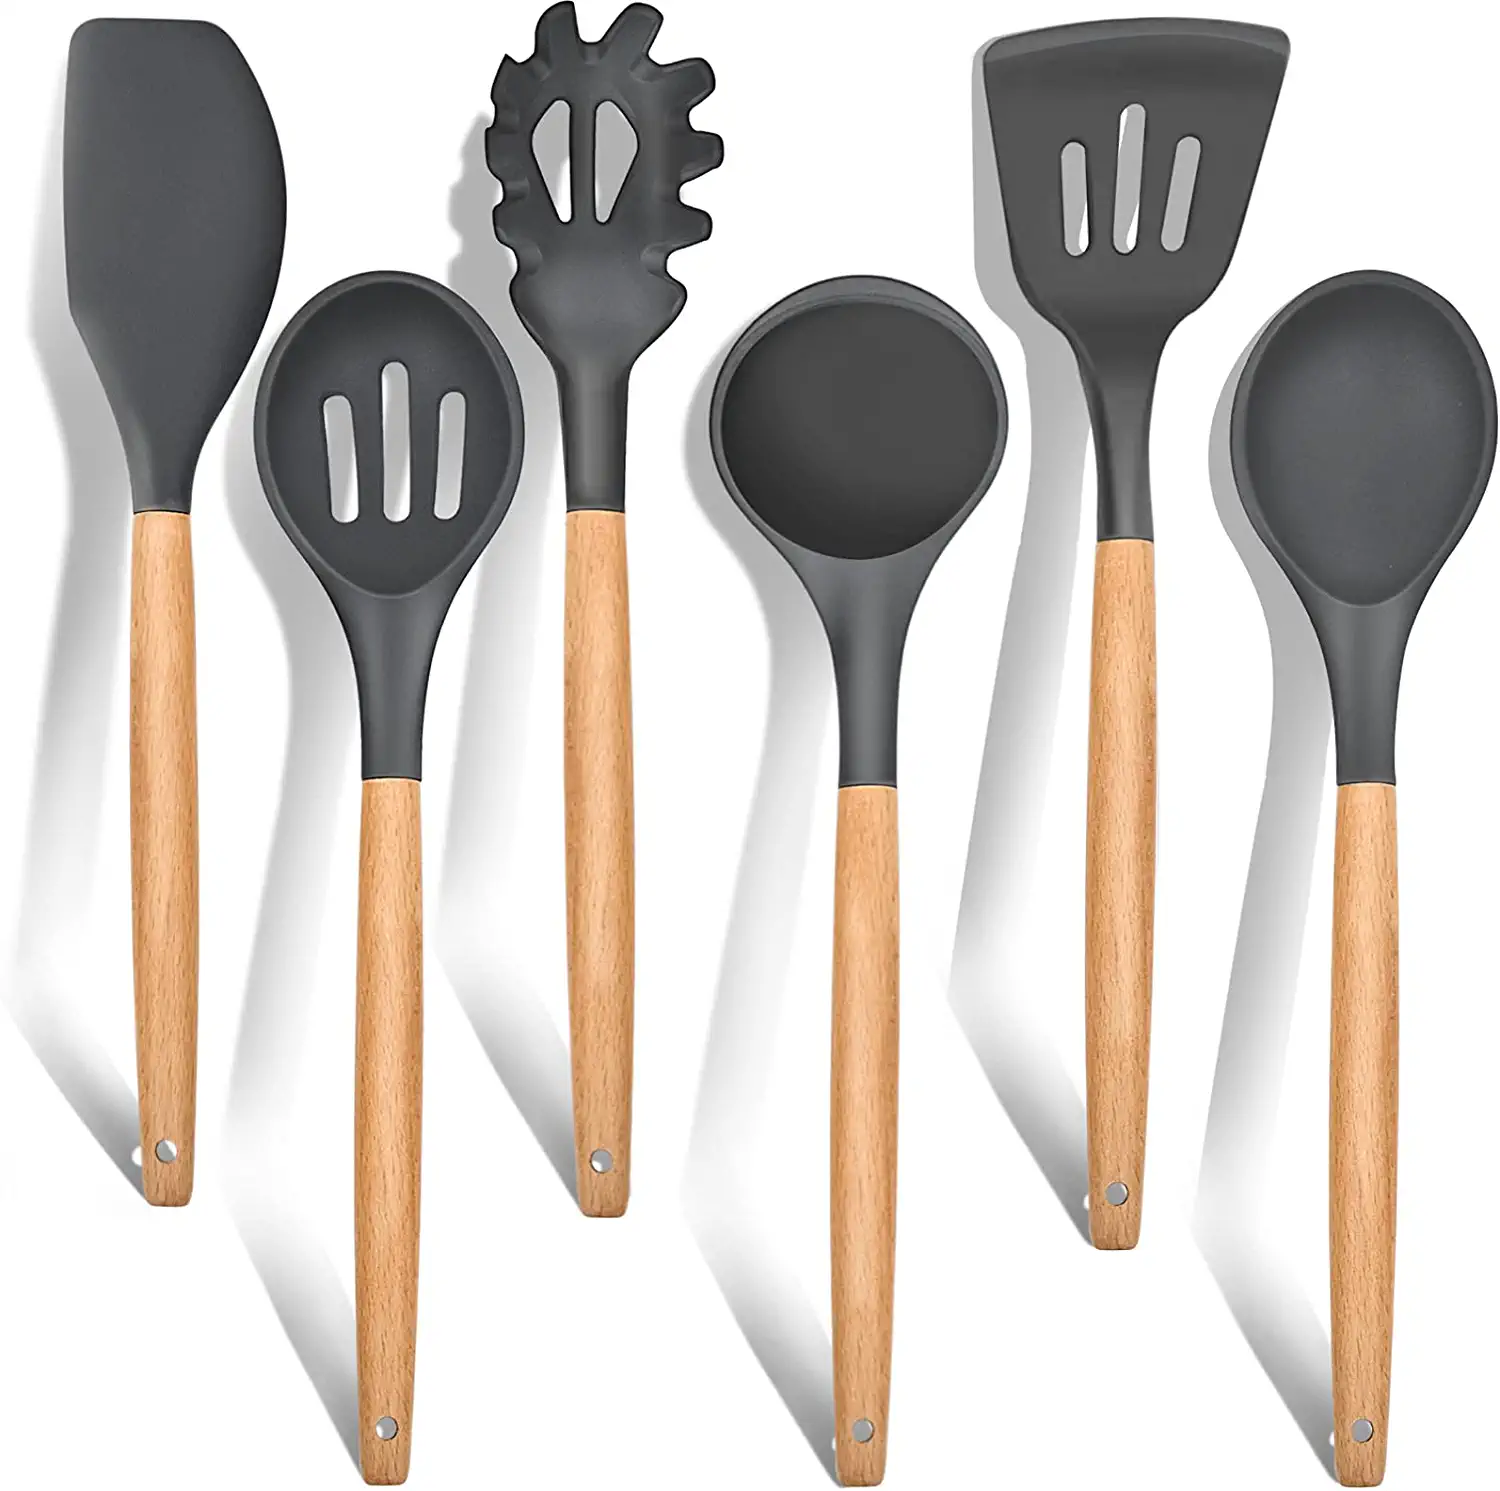 Photo 1 of 6 Pieces Silicone Cooking Utensils Set with Wood Handle, Nonstick and Heat Resistant Cooking Utensils- Grey